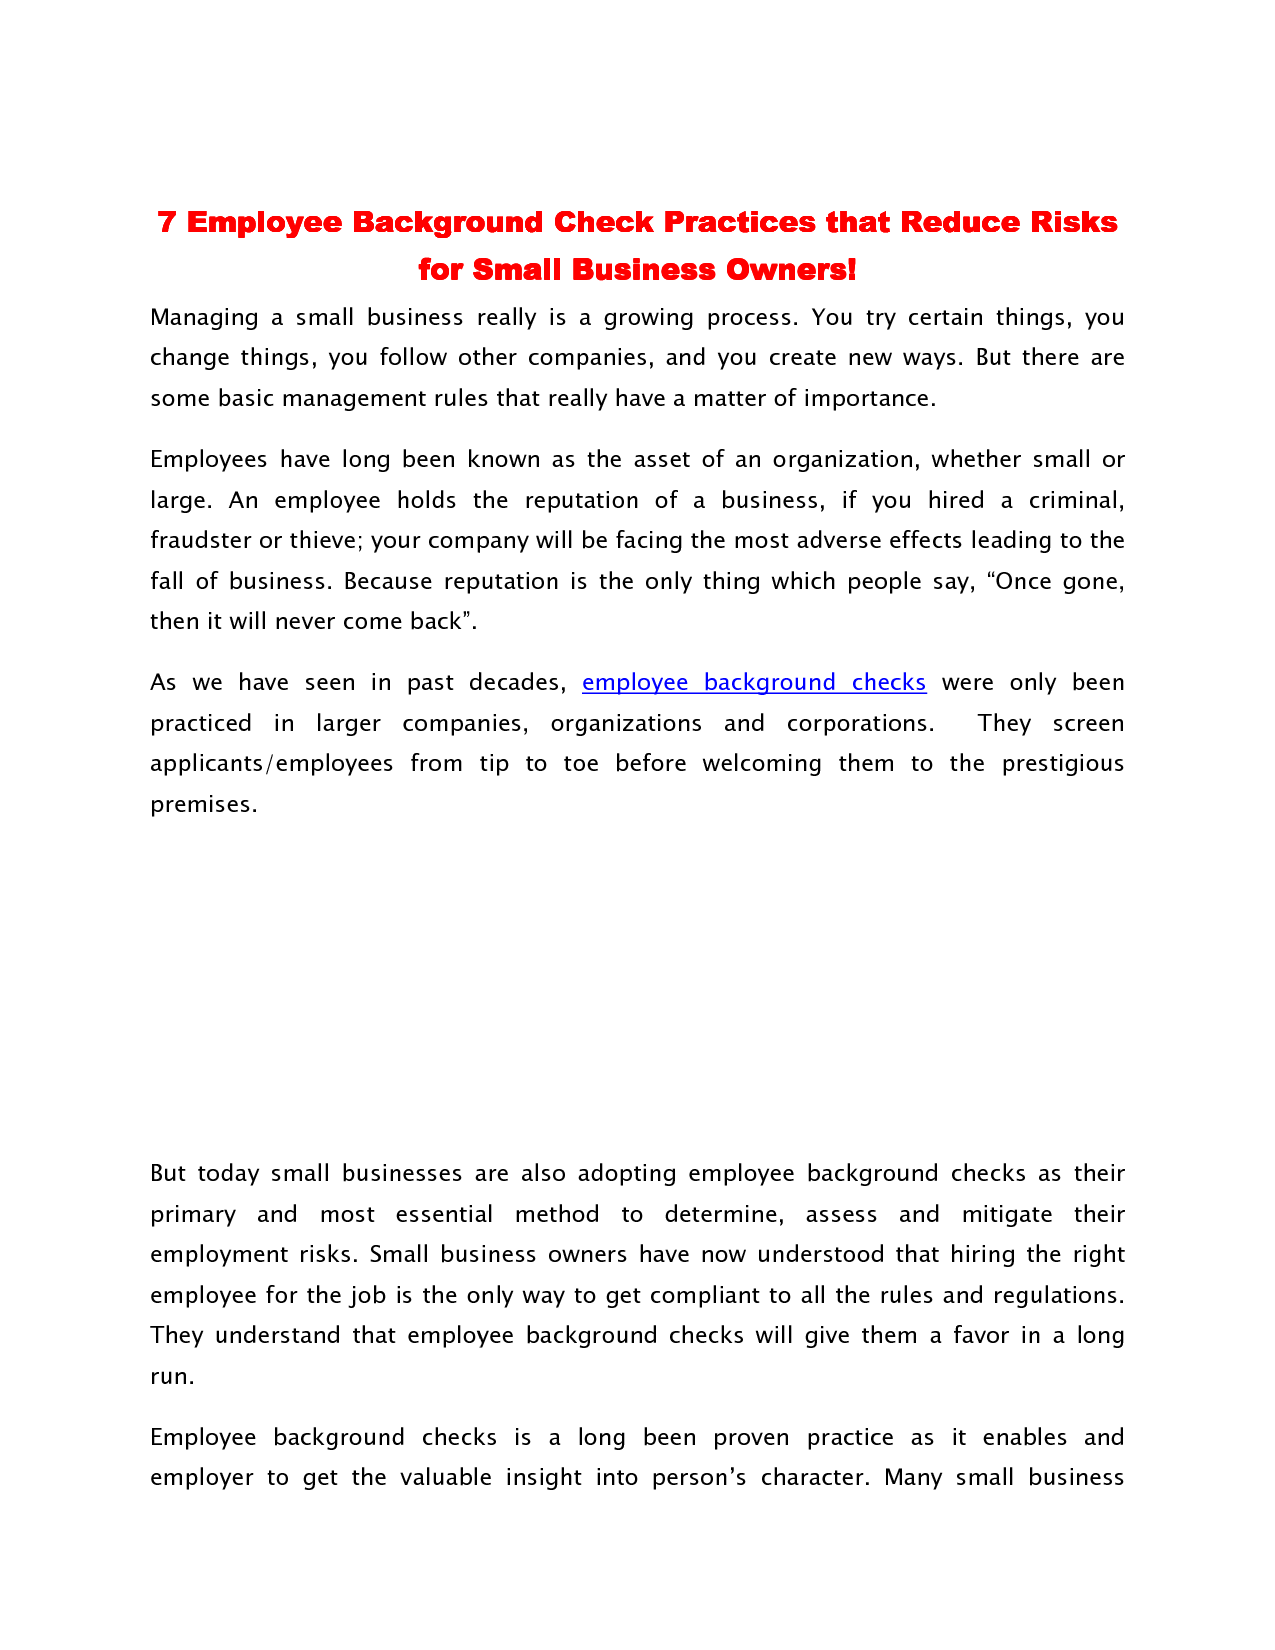 Employee Background Check Practices That Reduce Risks For Small